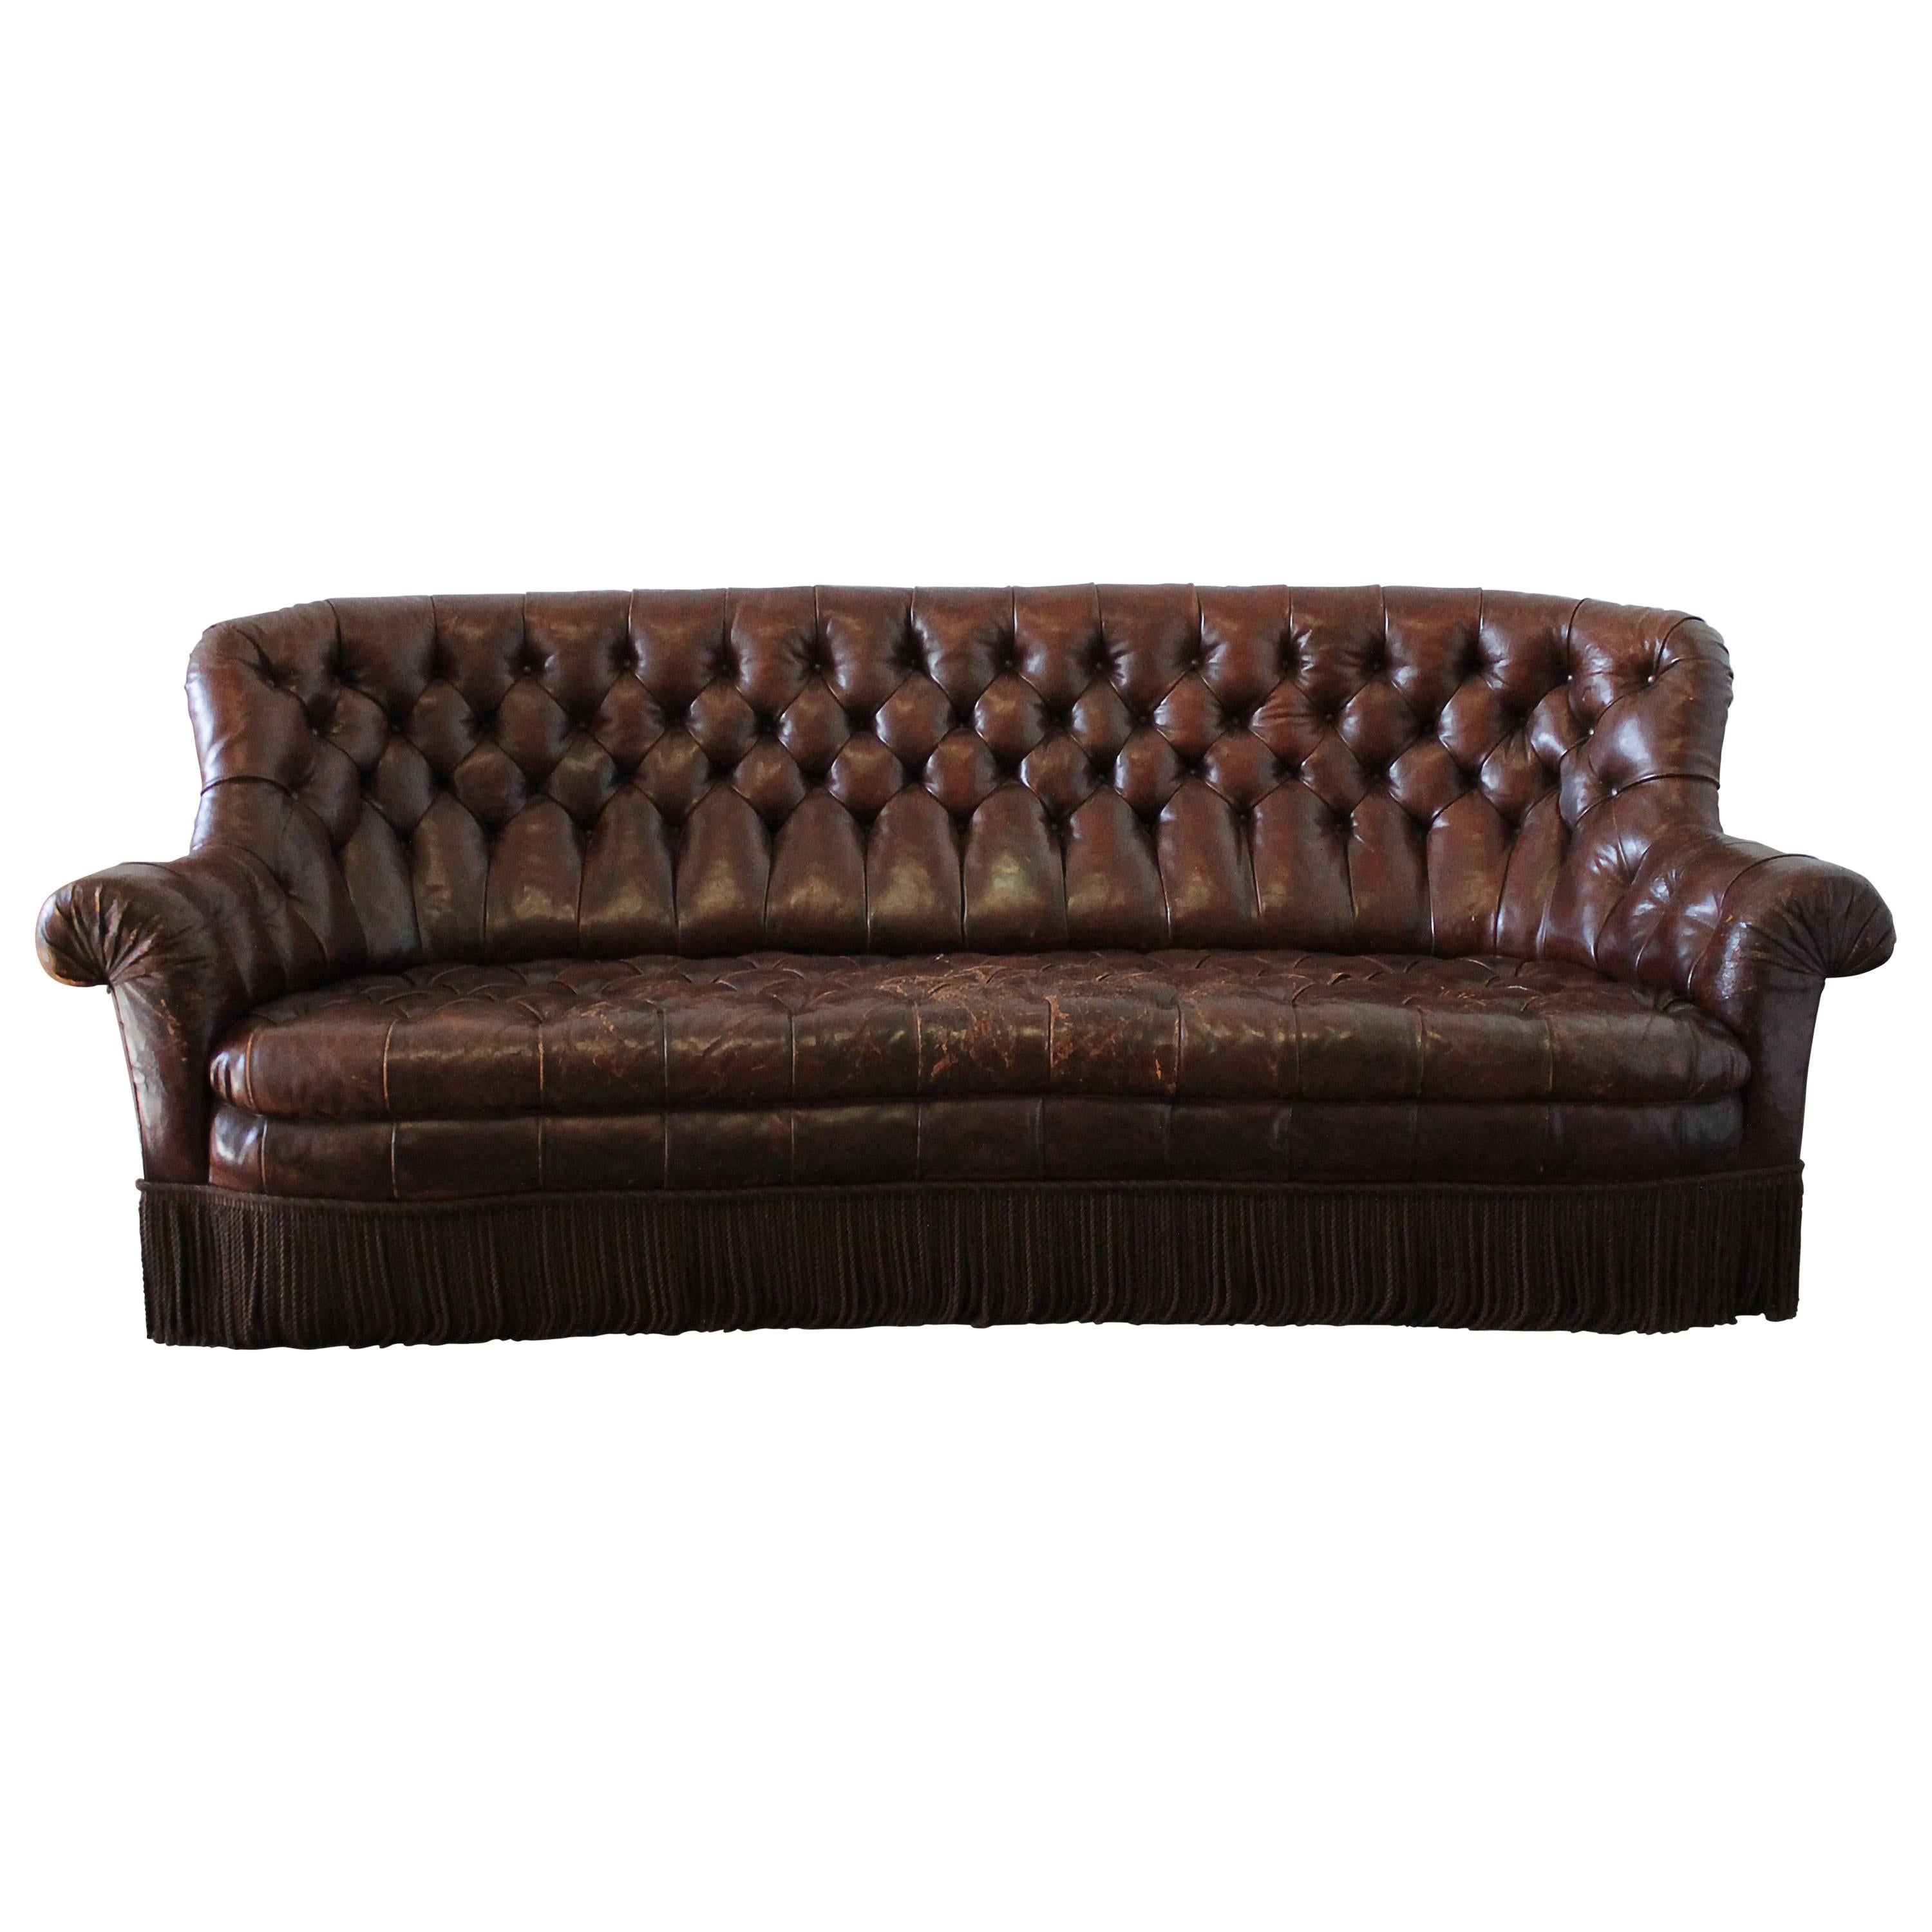 Vintage Rich Brown Leather Chesterfield Sofa with Bullion Trim